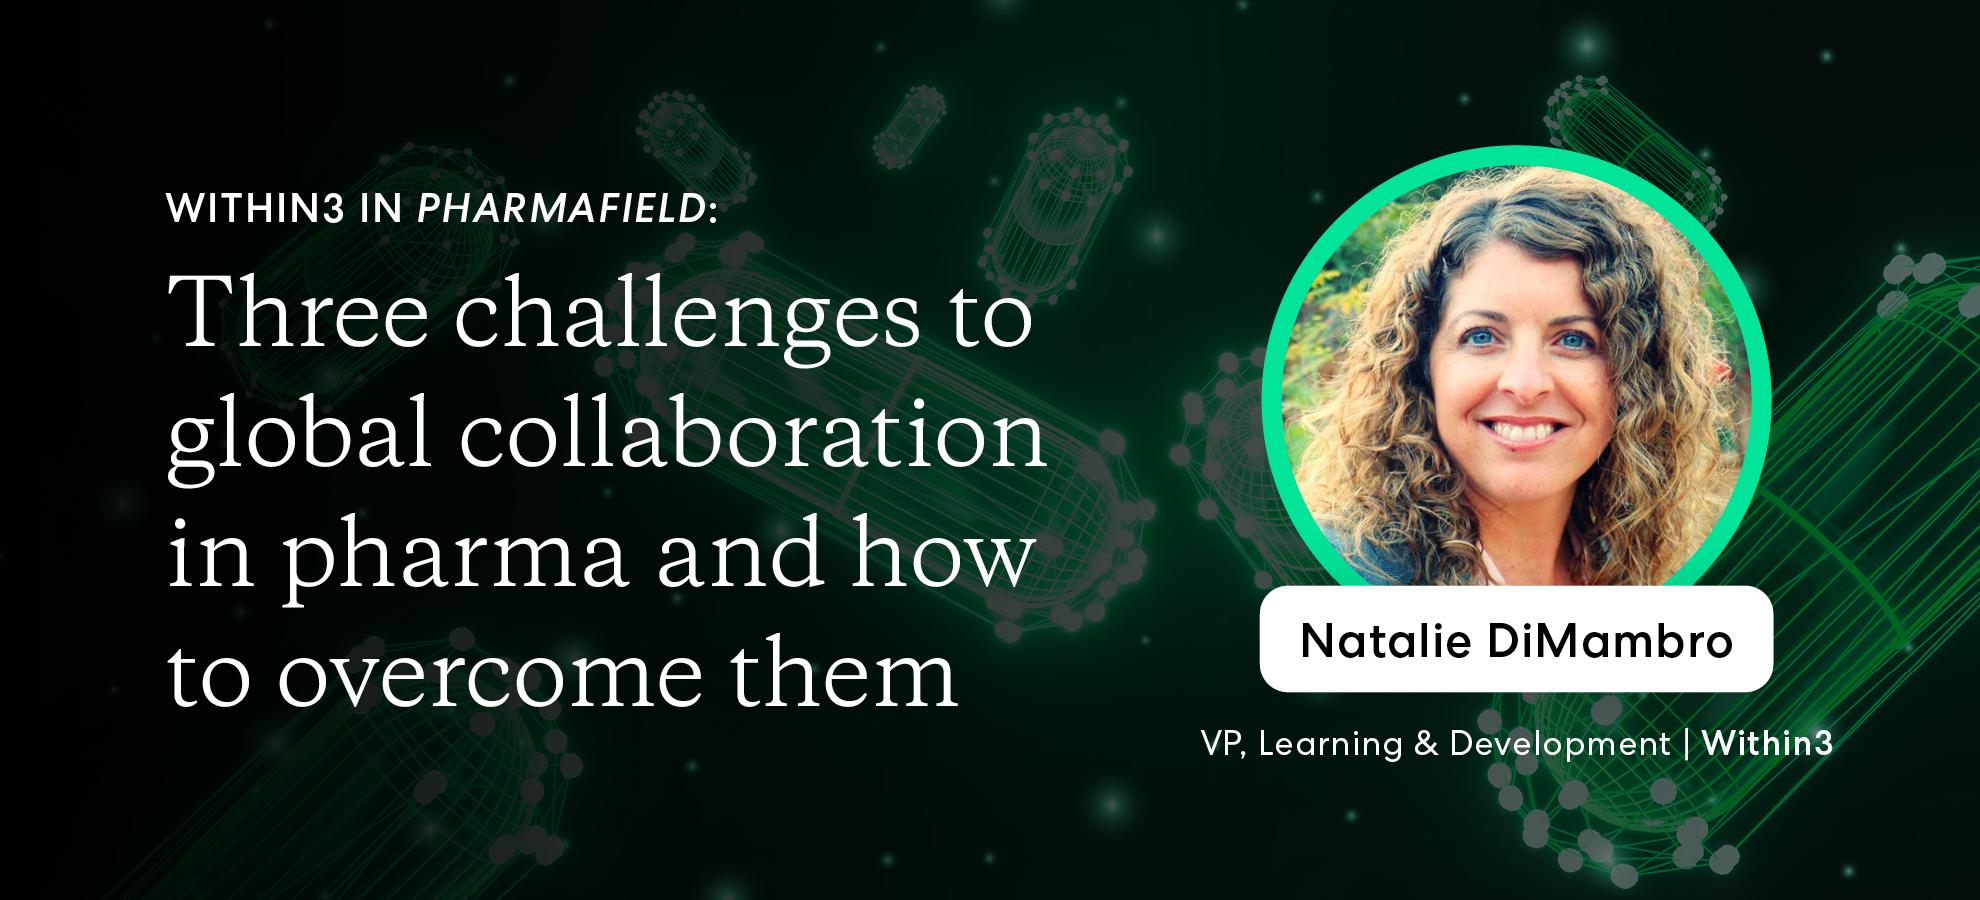 global collaboration challenges in pharma